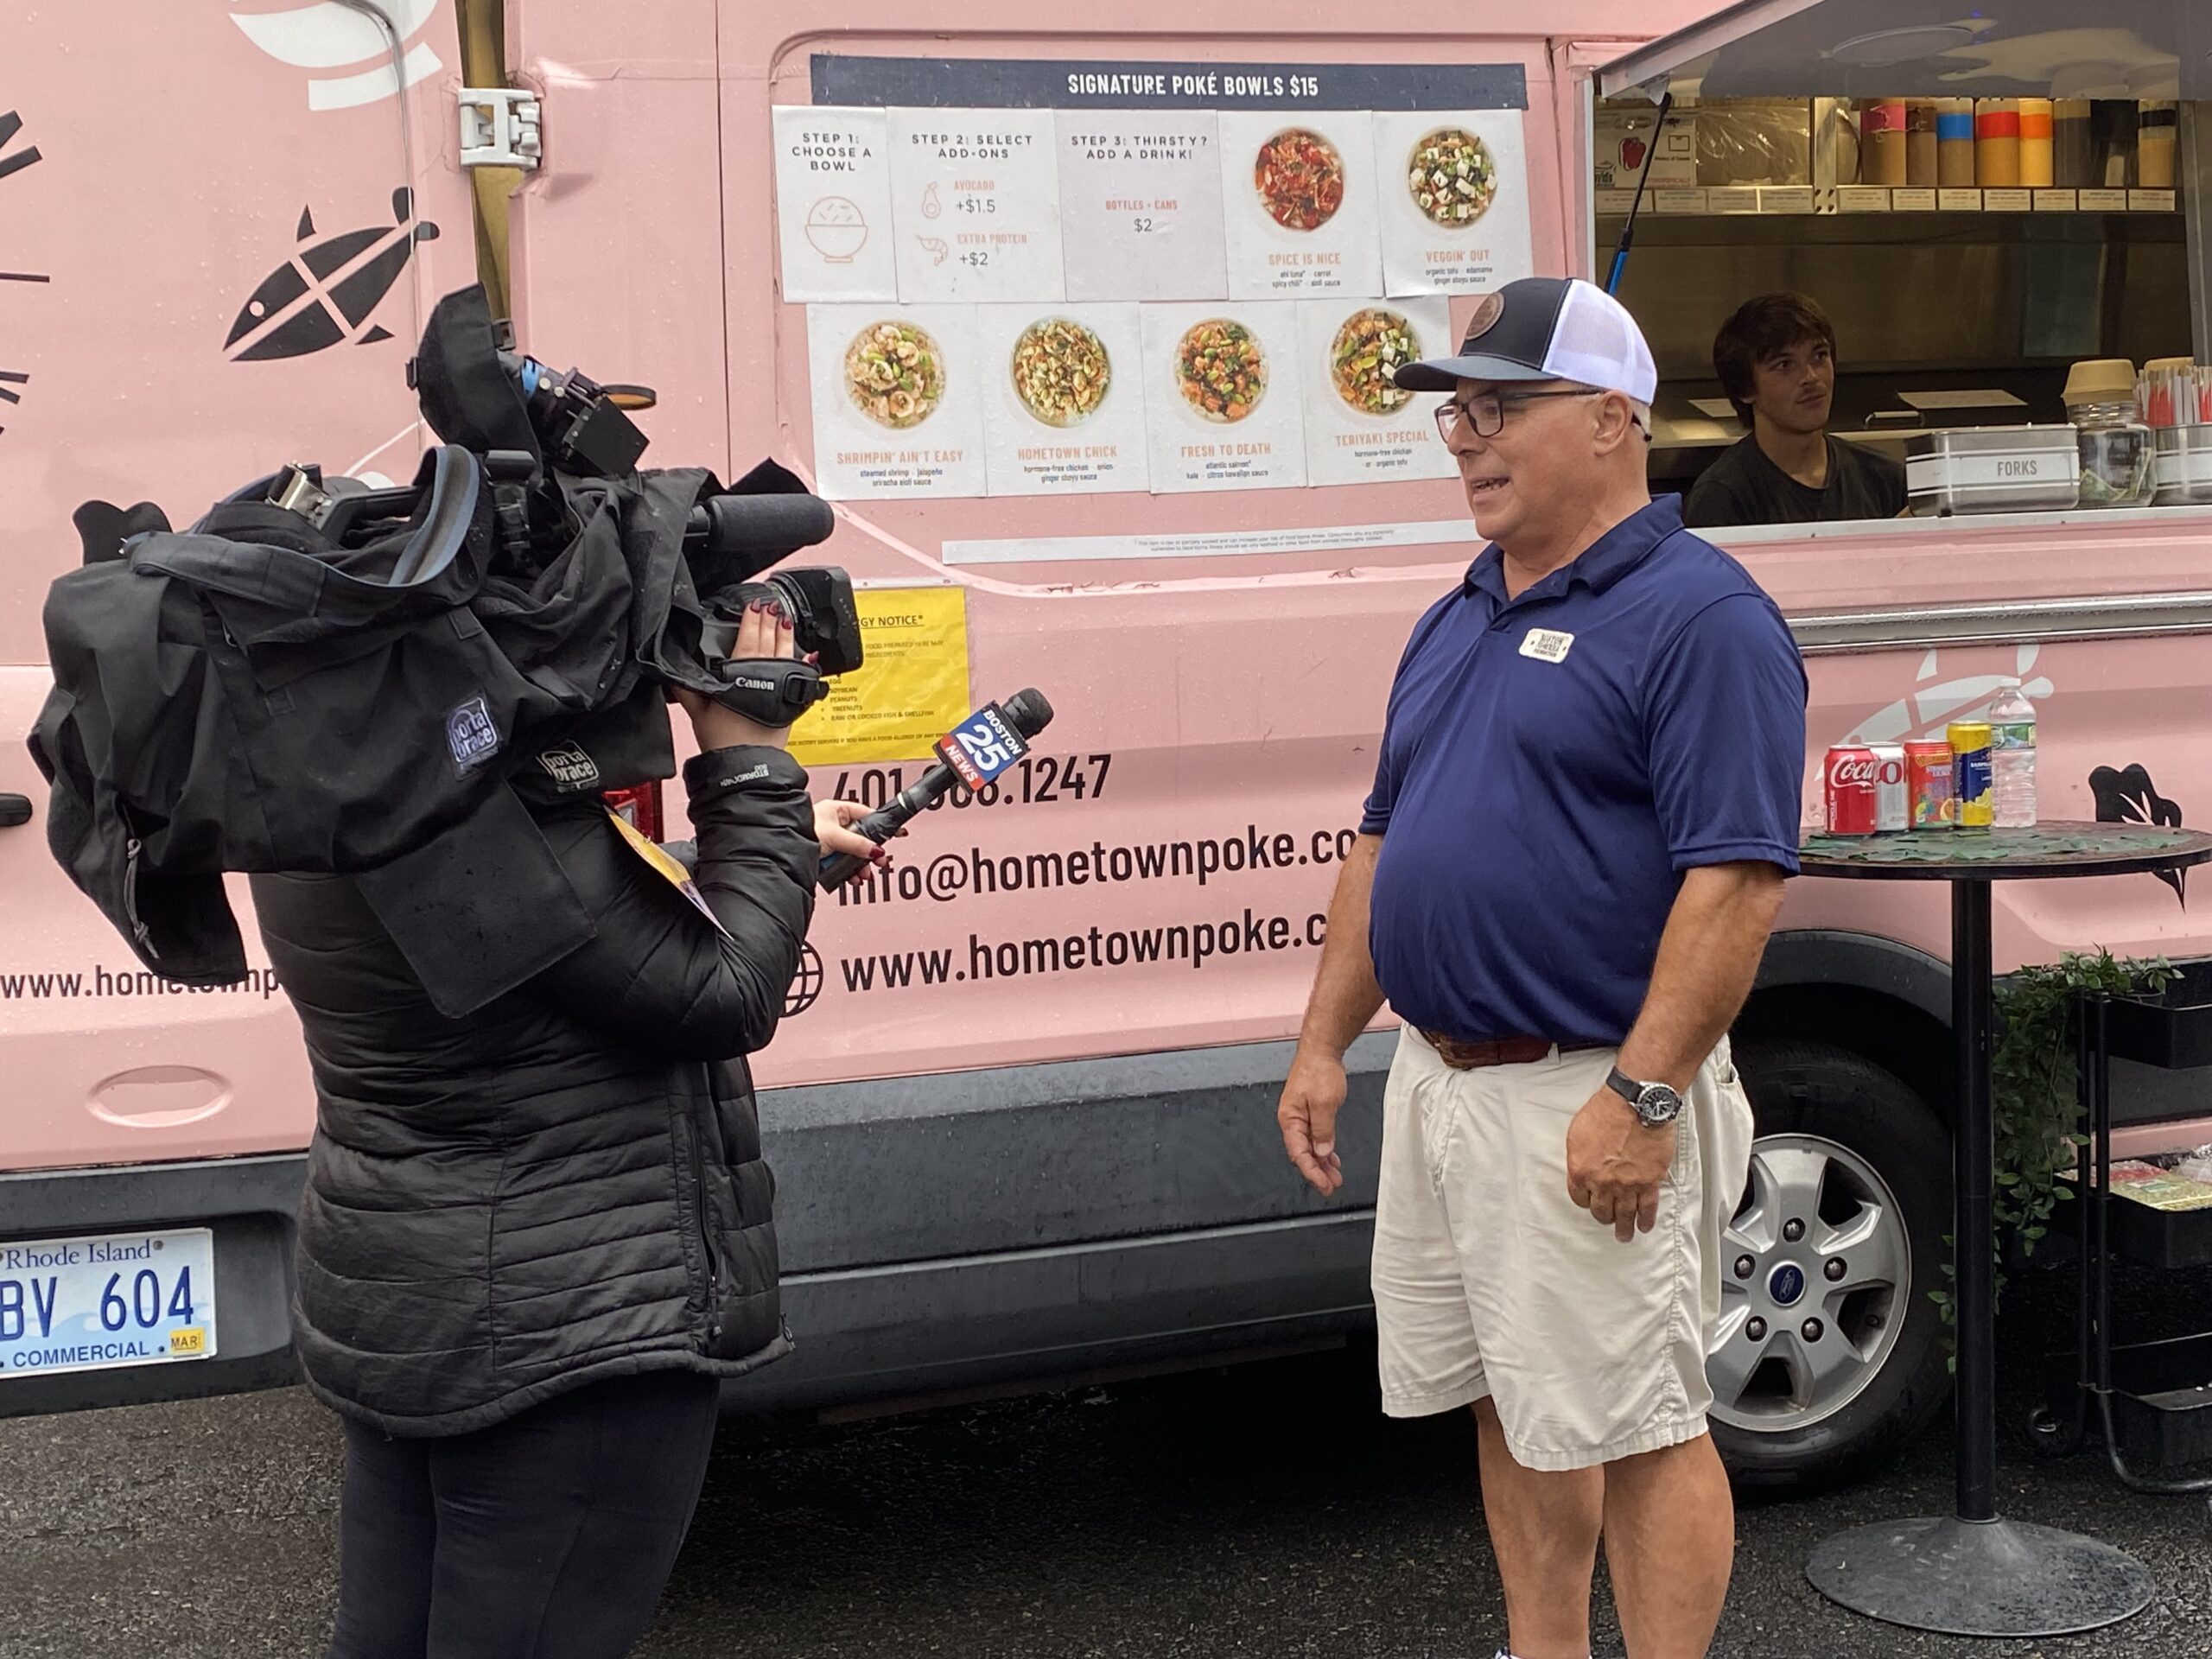 Man giving an interview in front of a news camera with a food truck as a backdrop